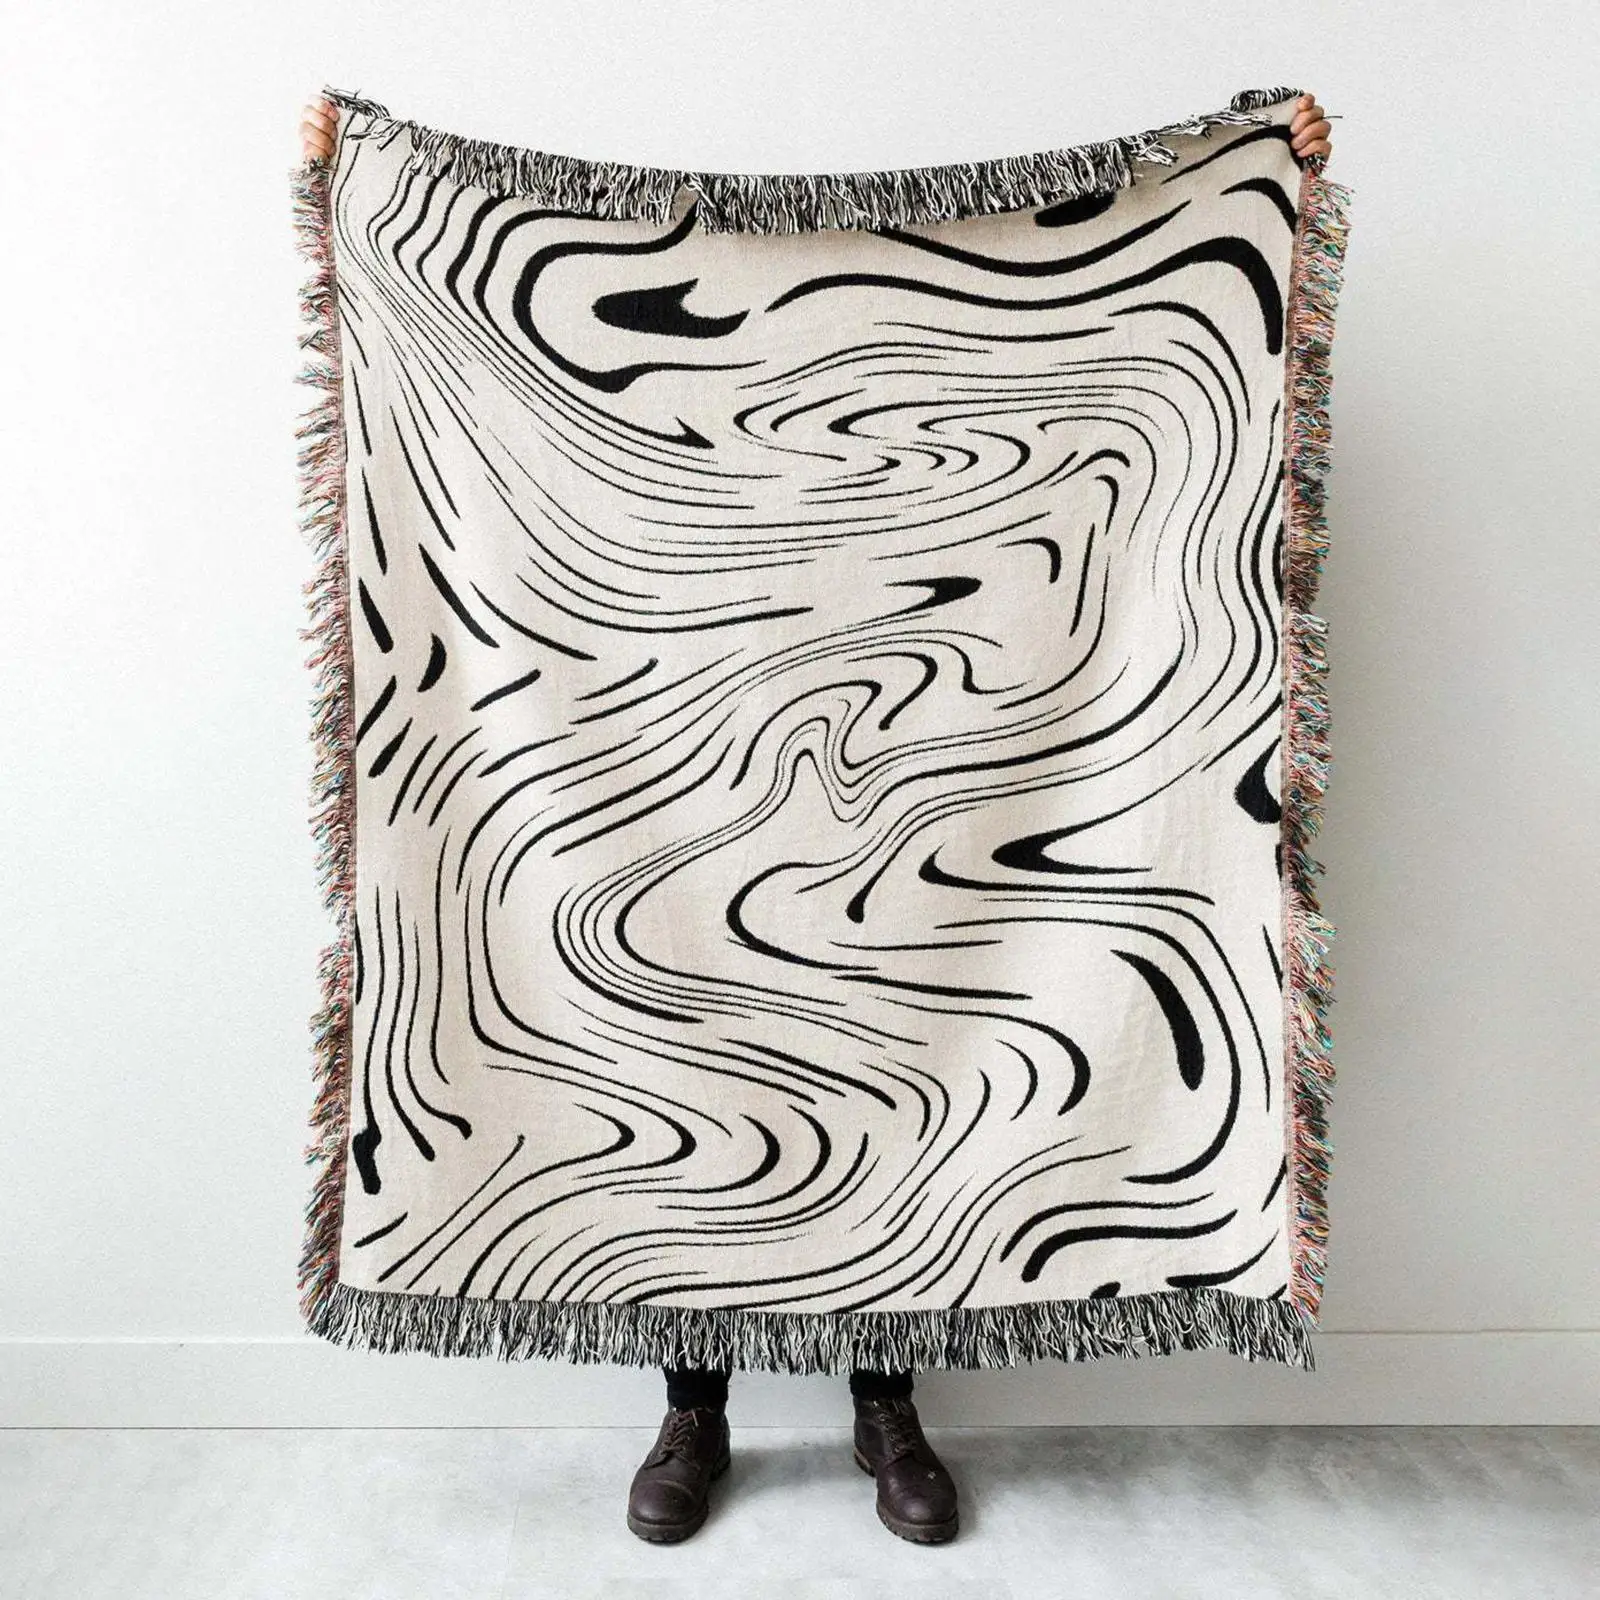 Casual Blanket Water Ripple Versatile Table Cover Wall Hangings Carpet Decoration for Bedspread Travel Dorm Living Room Home